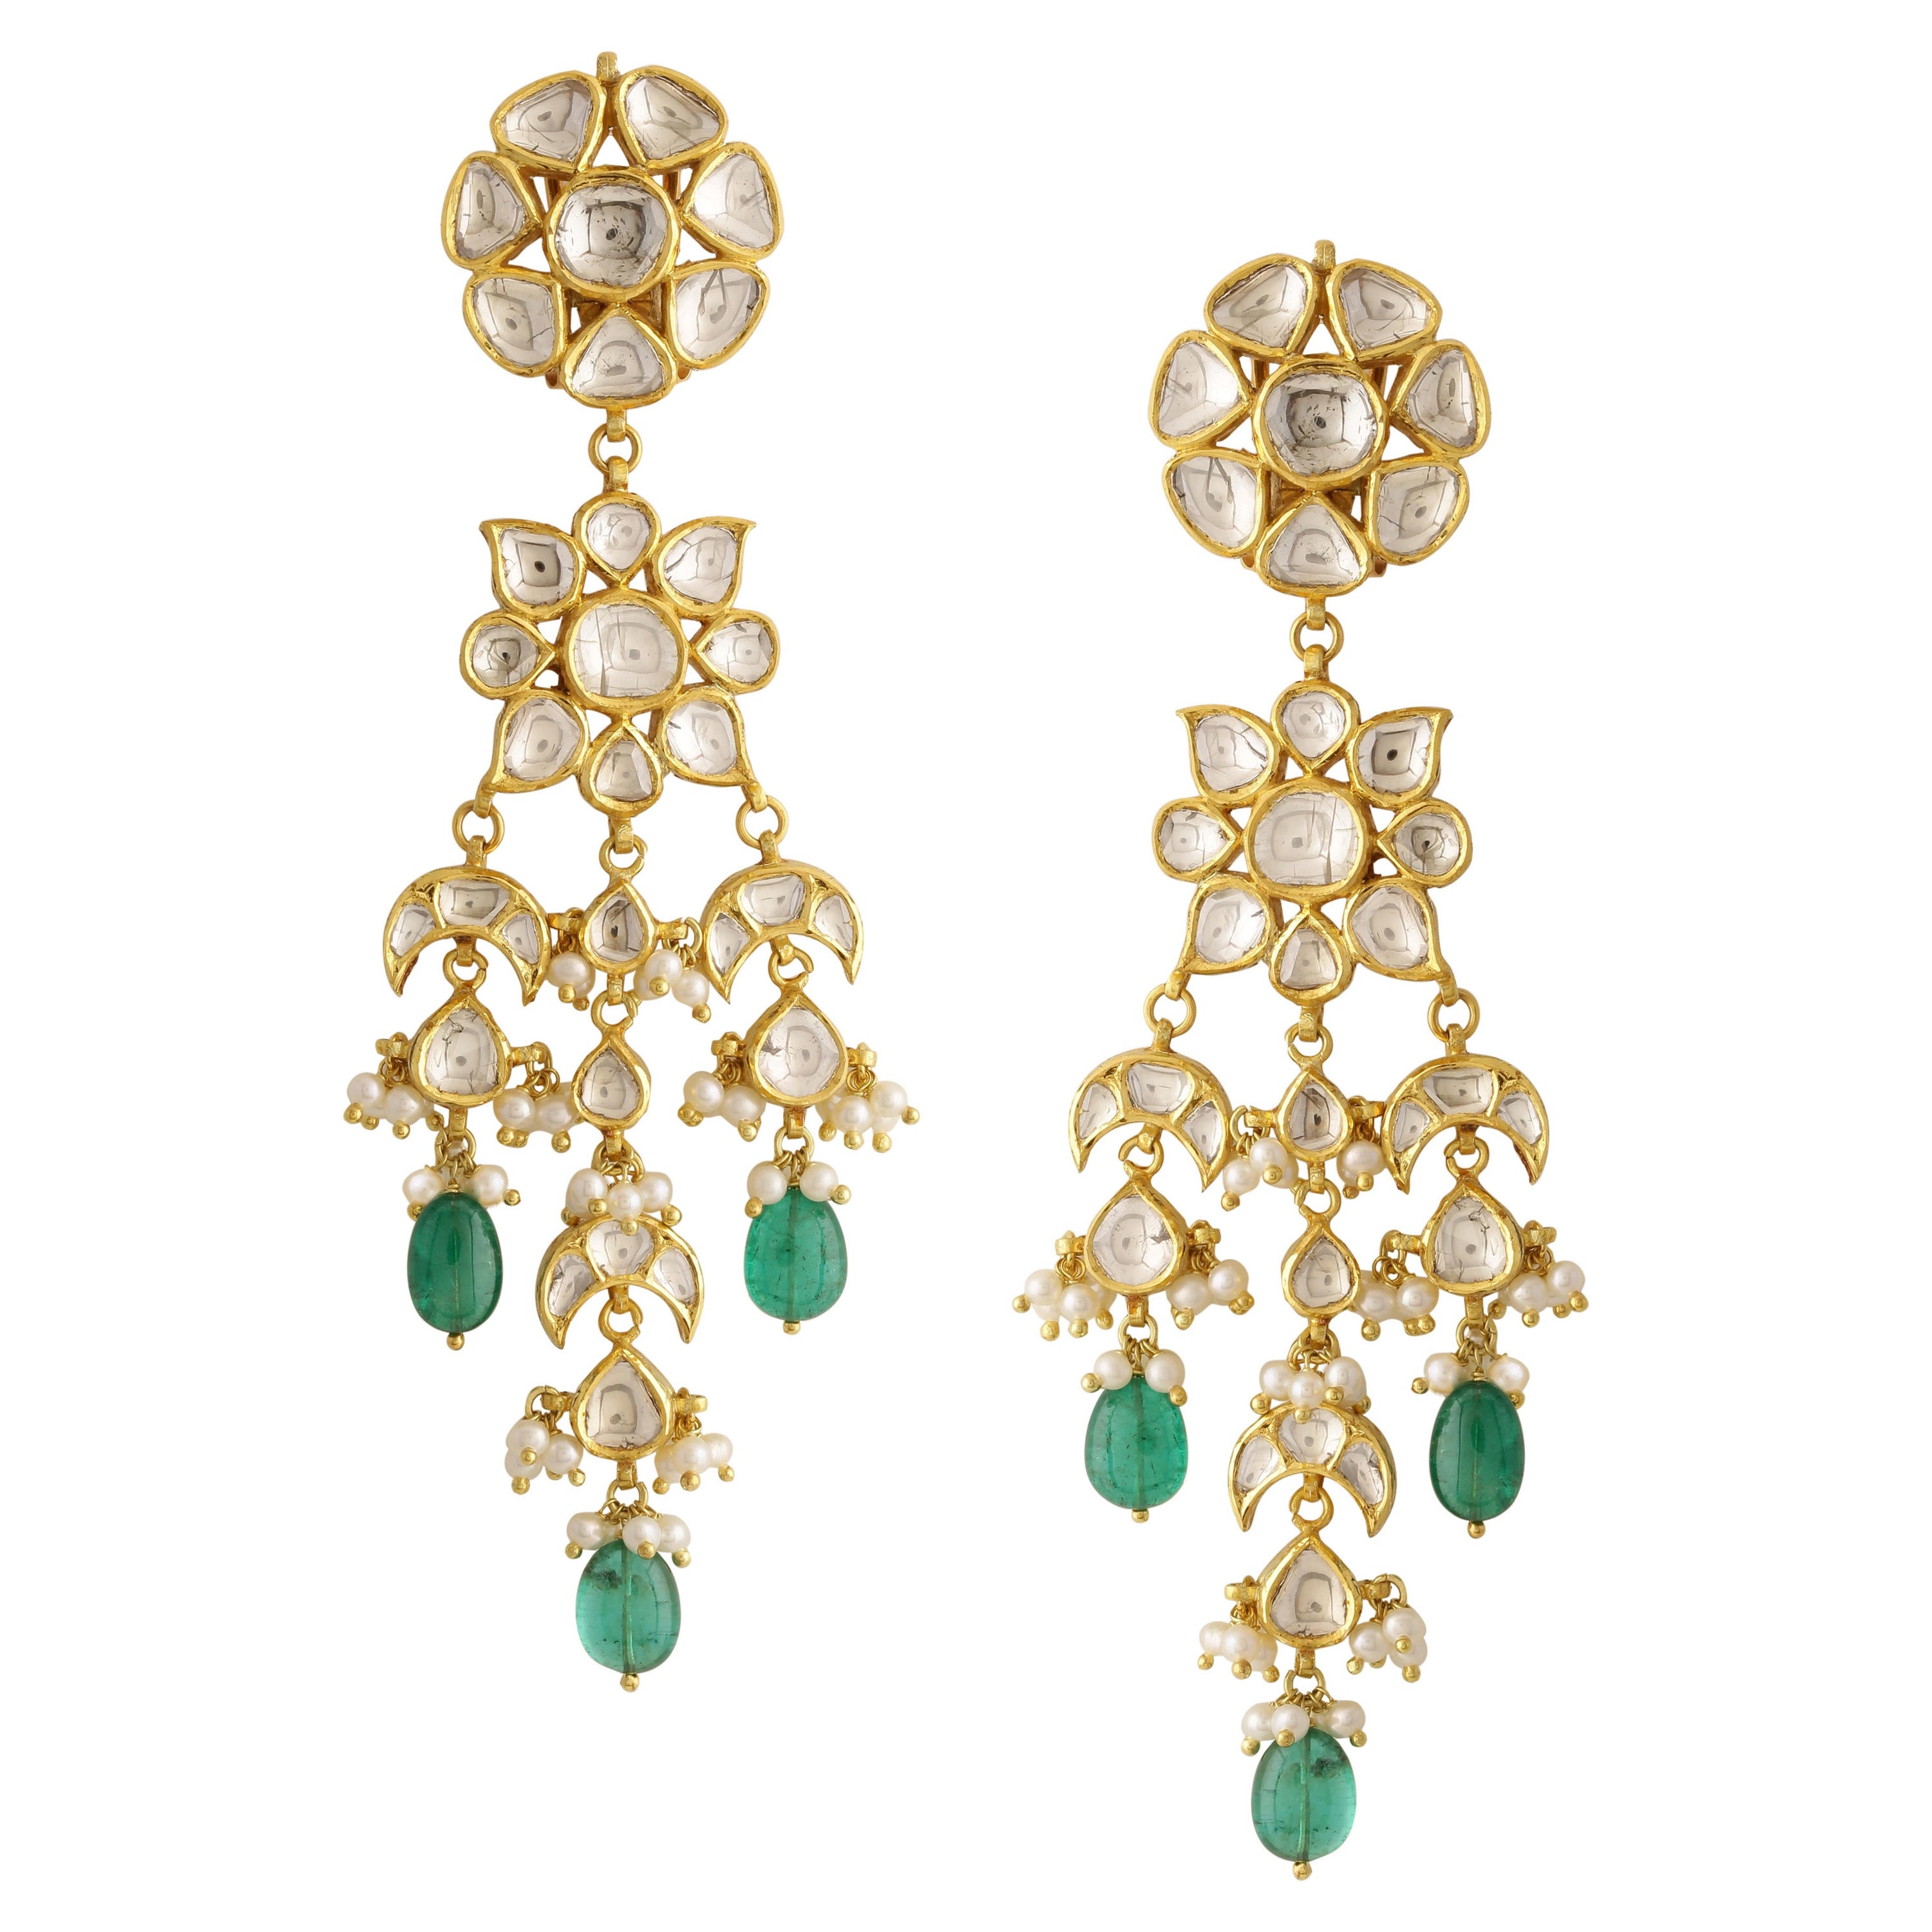 Diamonds and Emerald Chandelier Earring Handcrafted in 18K Gold with Fine Enamel